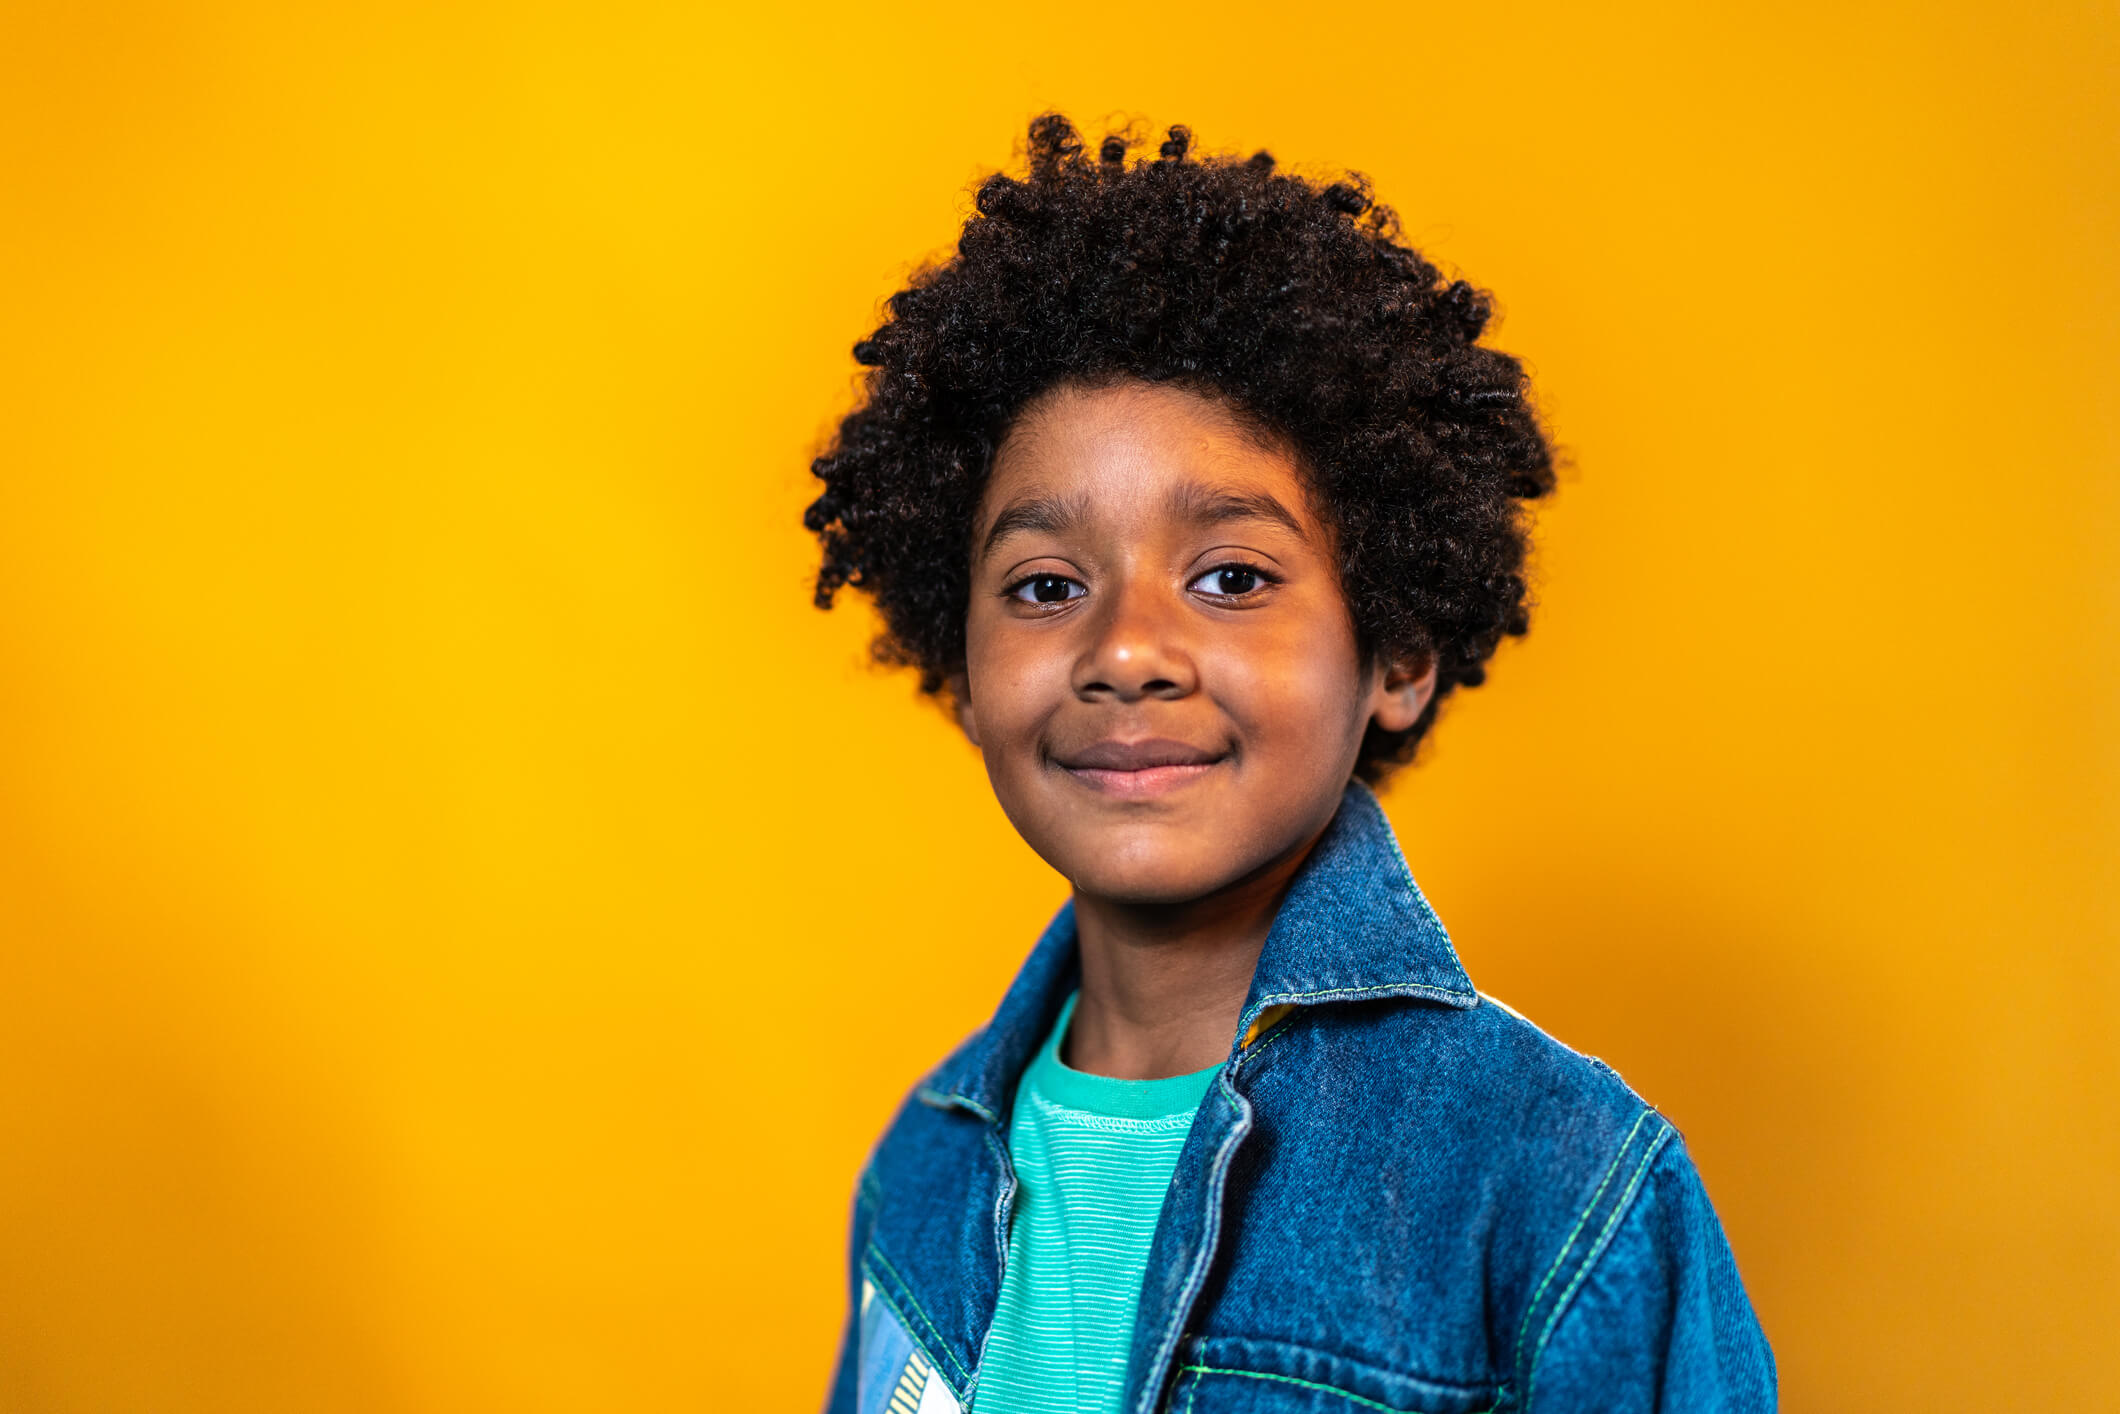 Black Hair Care Tips for Foster Parents - FosterAdopt Connect